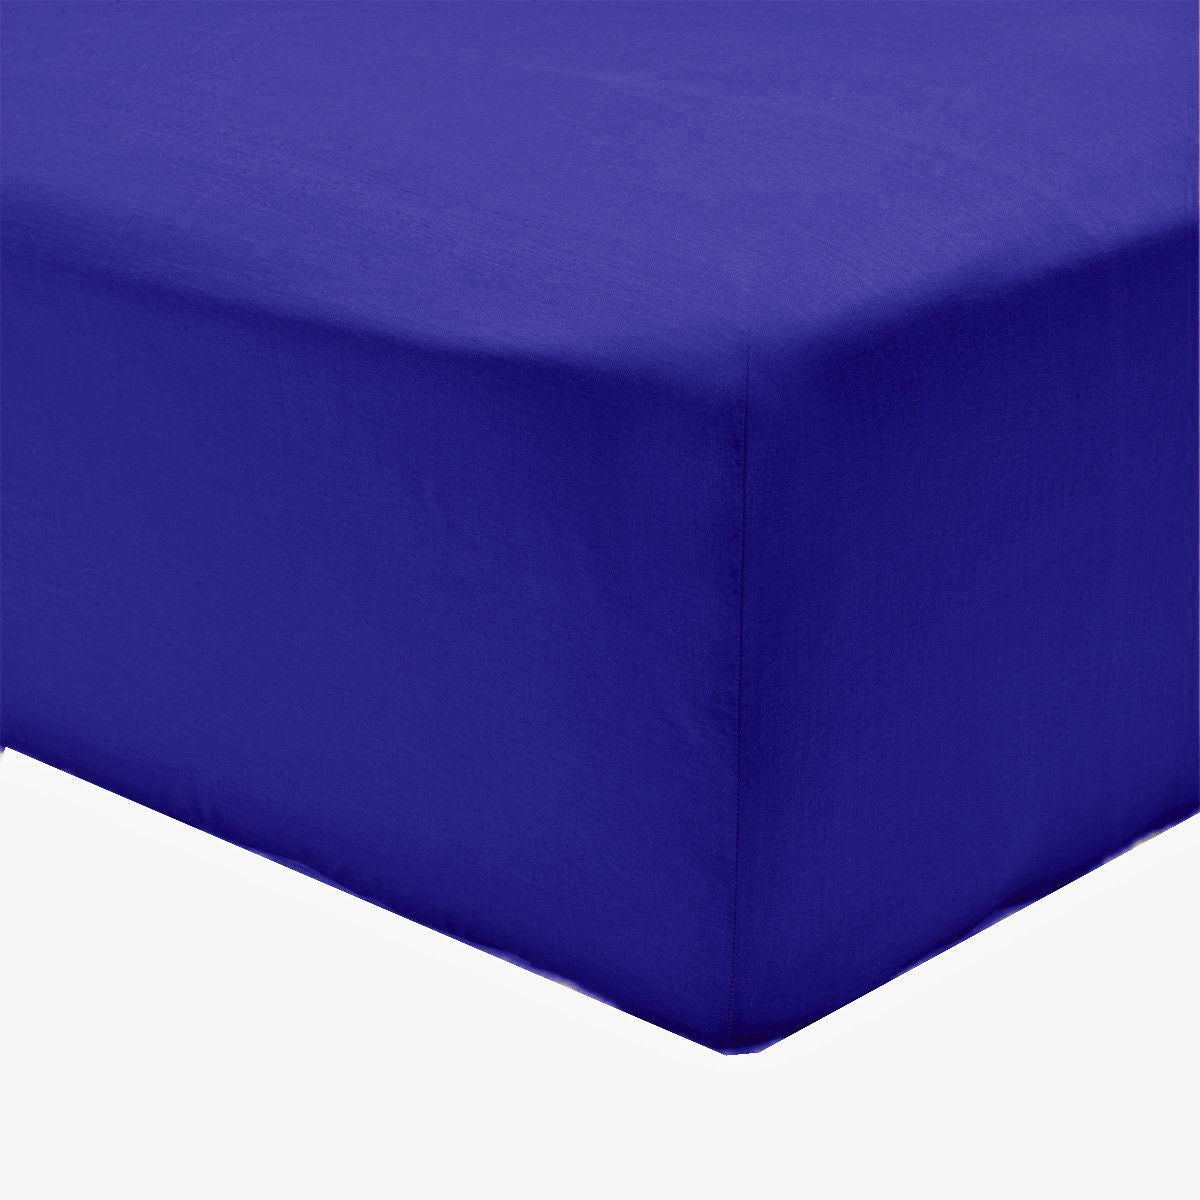 Egyptian Cotton Fitted Bed Sheet 16" Deep Or Pillowcase - TheComfortshop.co.ukBed Sheets0721718961307thecomfortshopTheComfortshop.co.ukRoyal Blue 16In T200 Fitted Single NZRoyal BlueFitted Sheet Single OnlyEgyptian Cotton Fitted Bed Sheet 16" Deep Or Pillowcase - TheComfortshop.co.uk